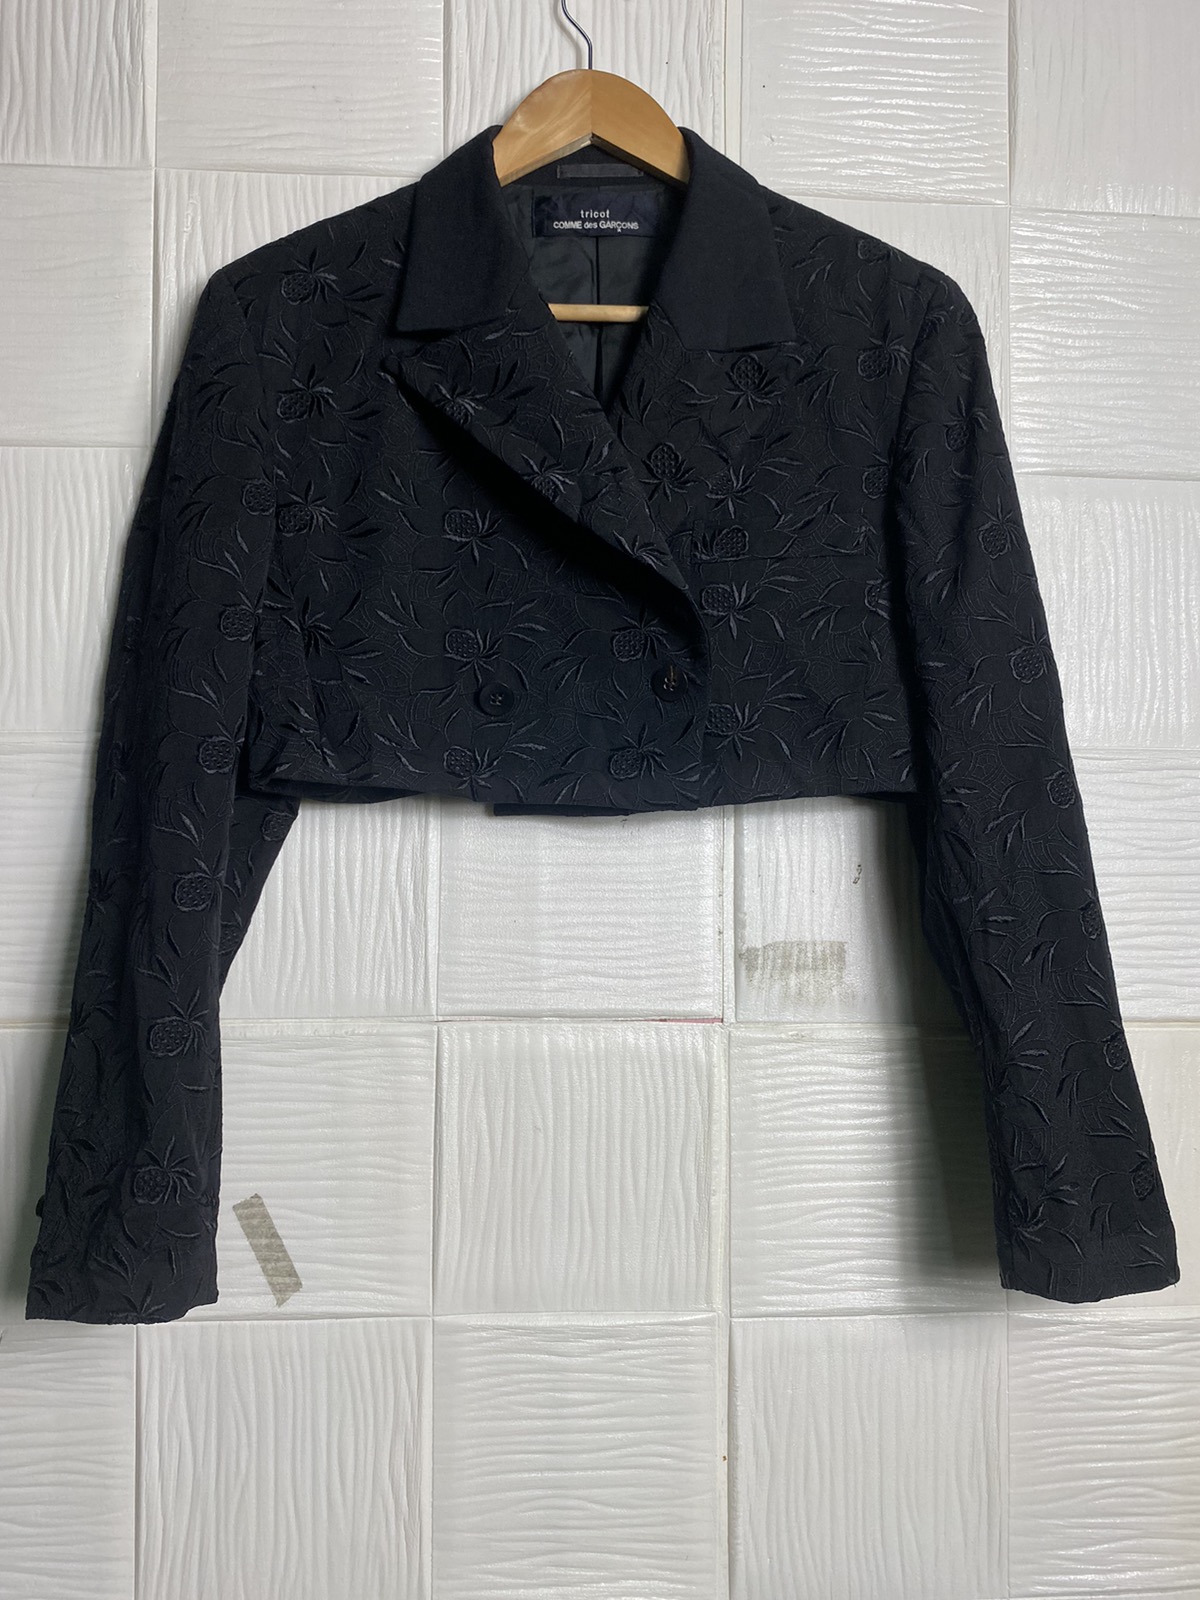 AD1988 HISTORY PIECE TRICOT COMME DES GARCONS CROPPED JACKET